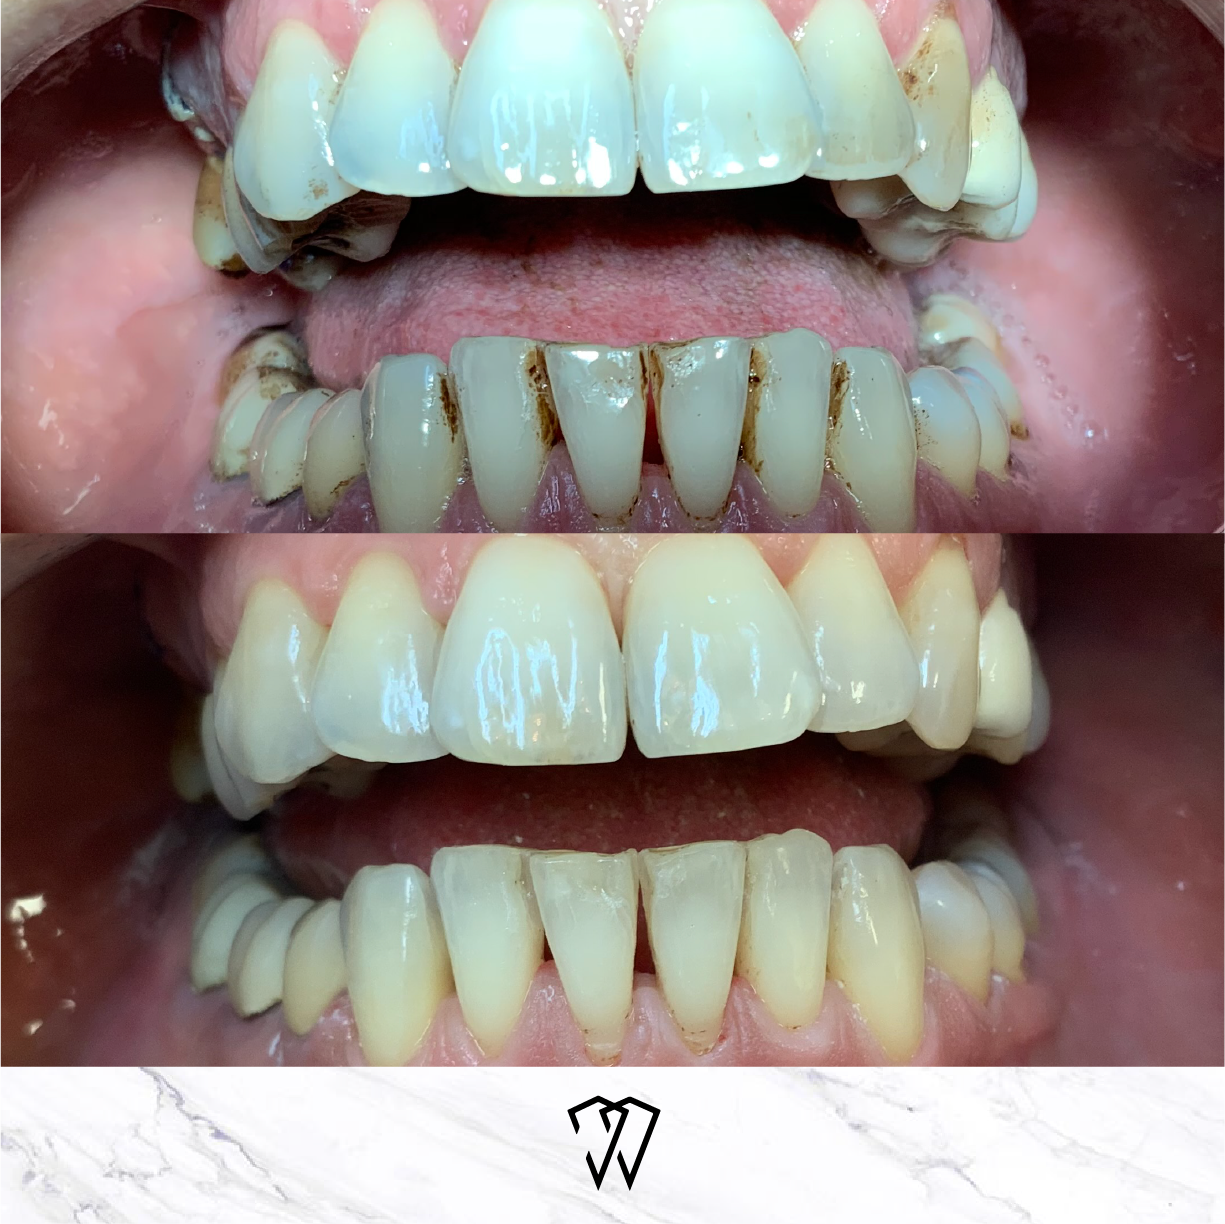 Teeth cleaning and polishing before and after images